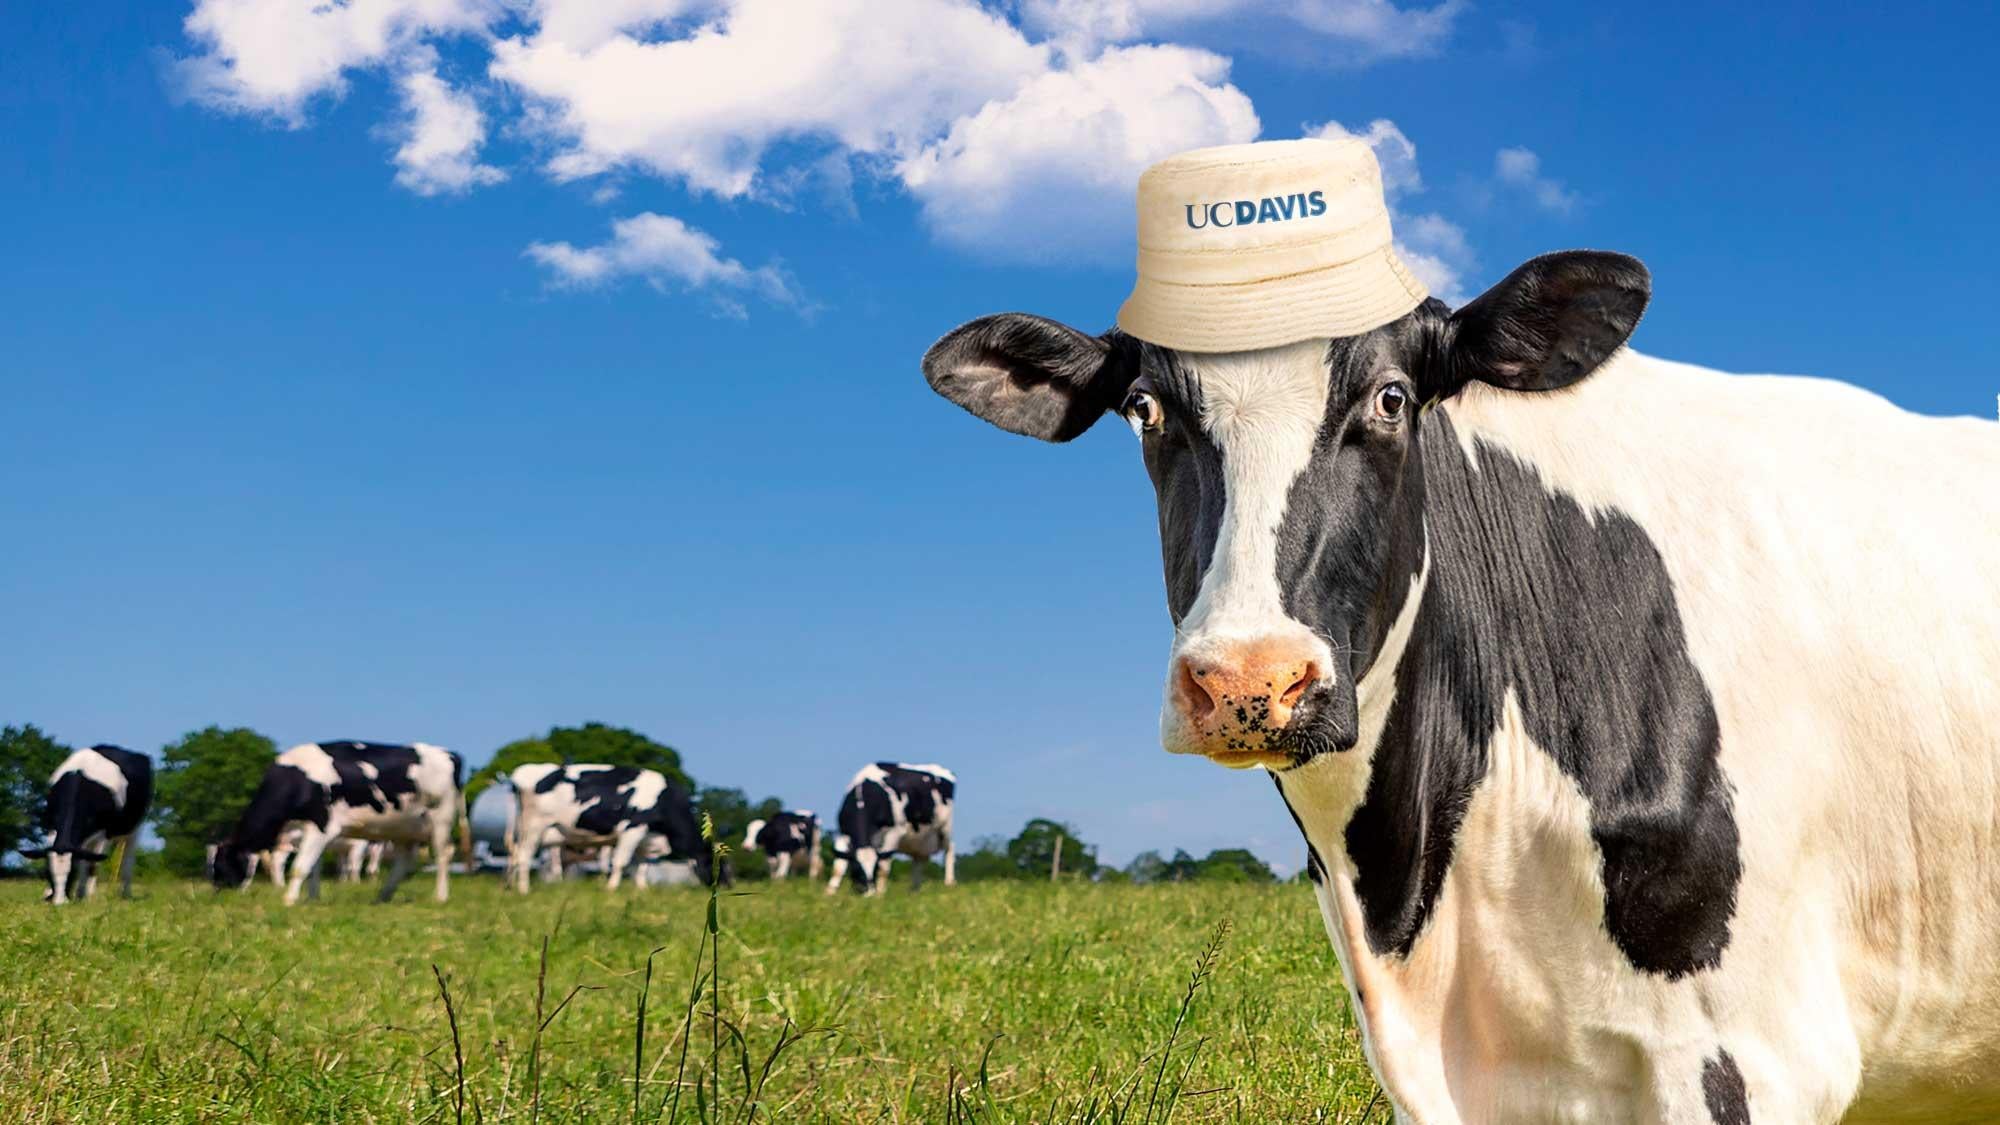 A photo illustration of a black and white dairy cow in a field with other cows, wearing a bucket hat with the UC Davis logo on it